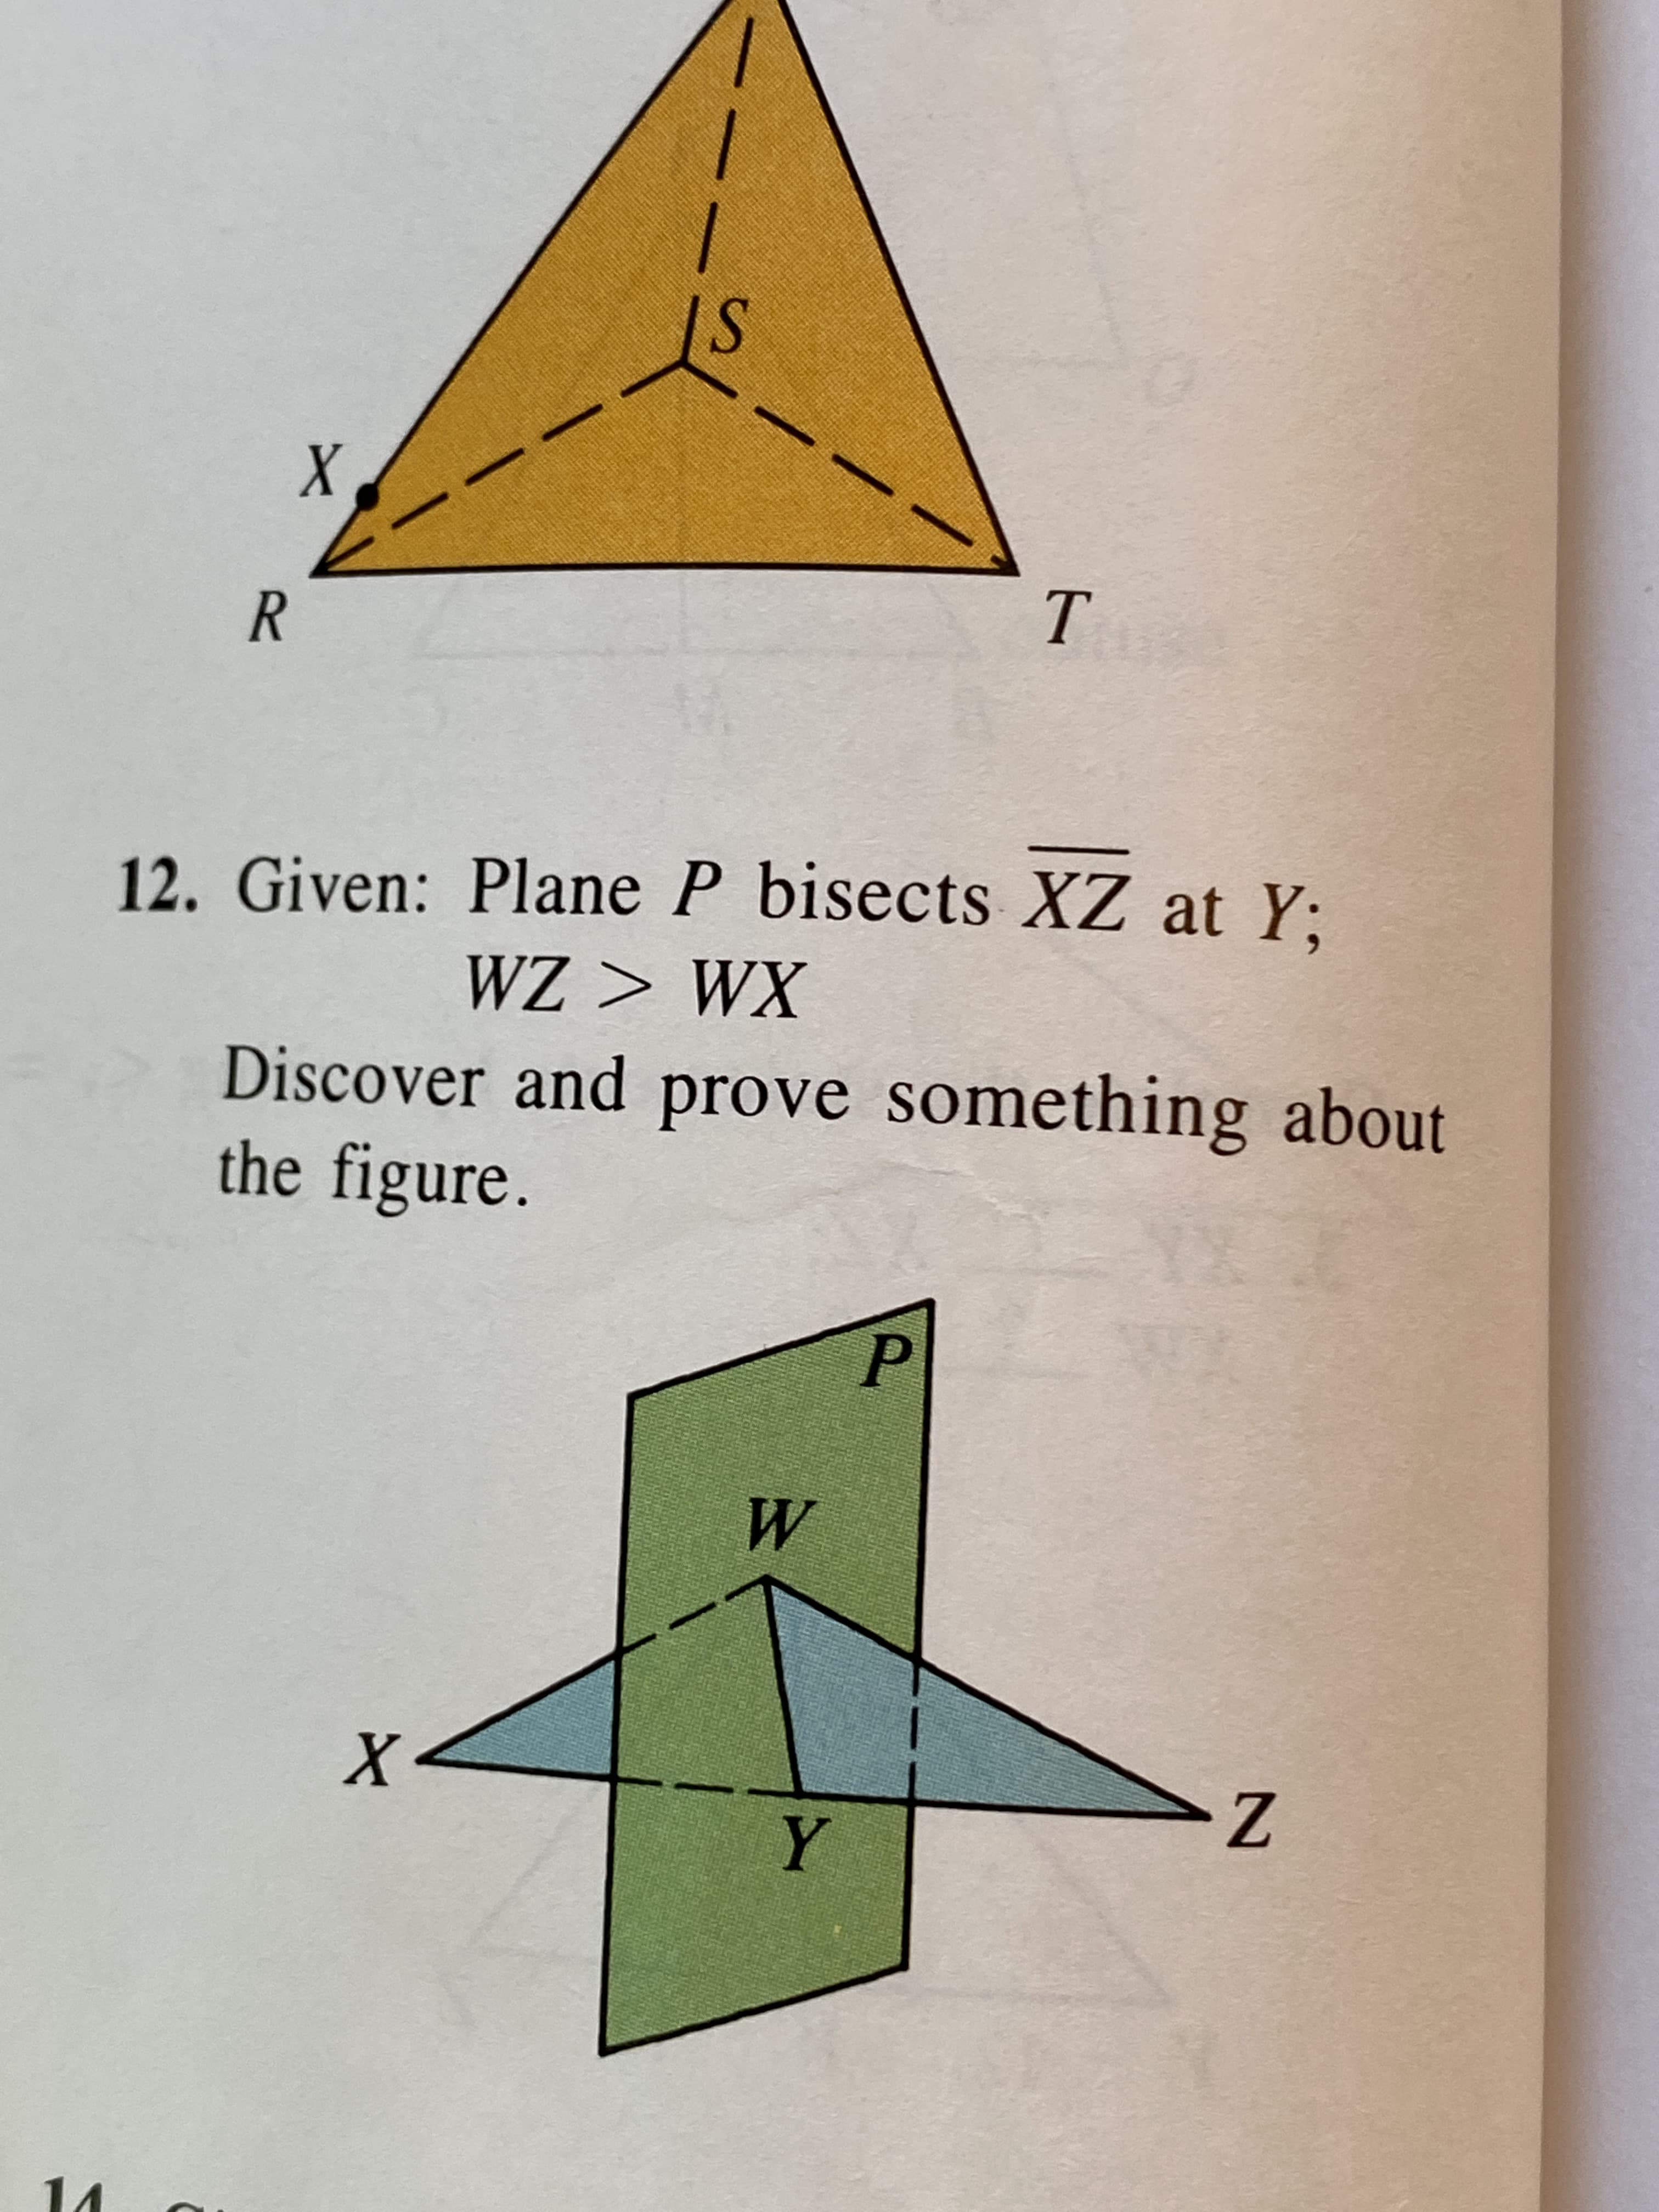 Given: Plane P bisects XZ at Y:
WZ > WX
Discover and prove something about
the figure.
